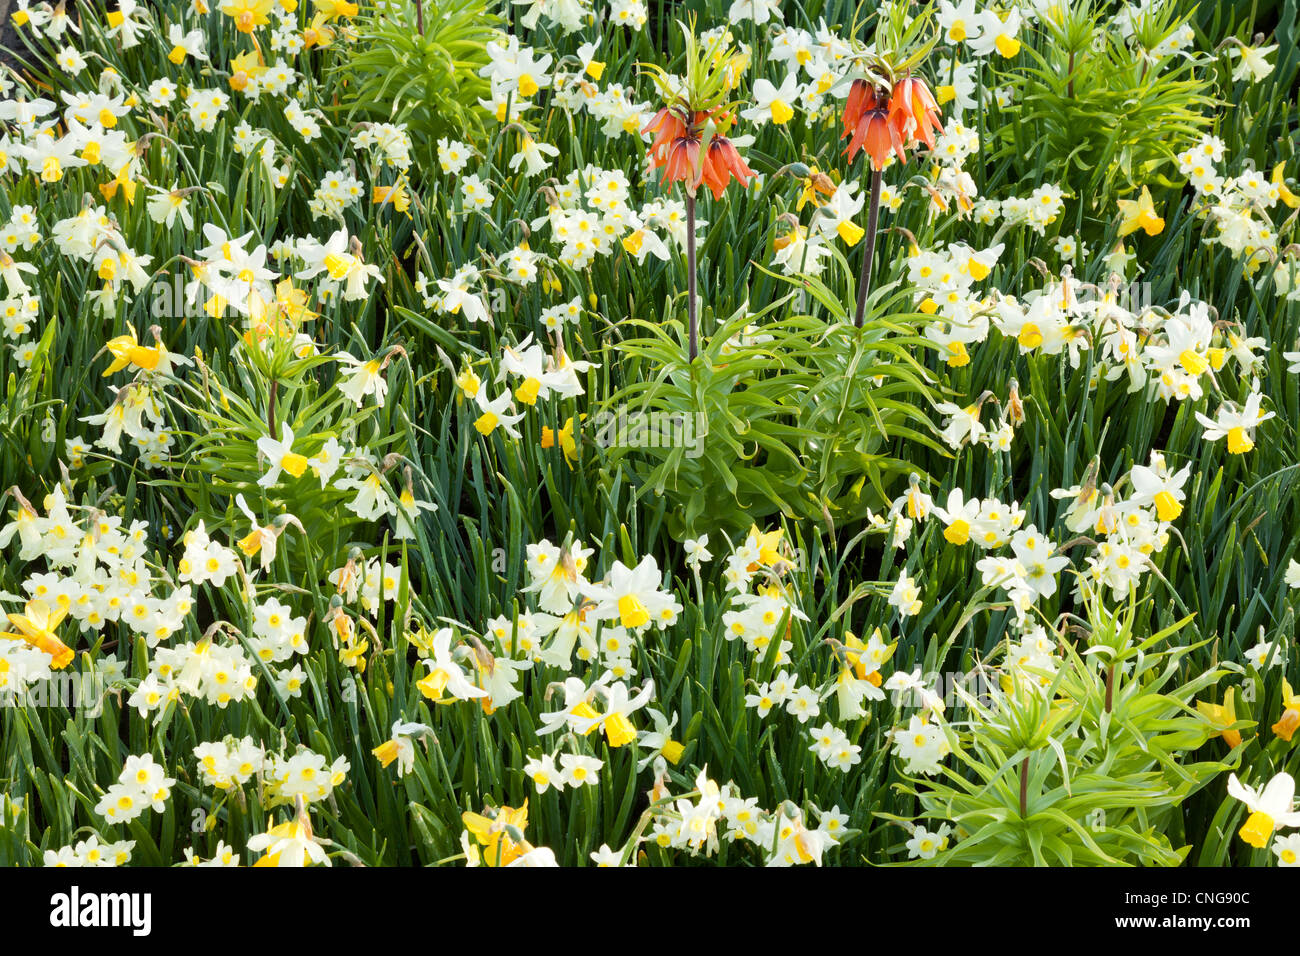 Daffodils ' Hawera', 'Jetfire', 'W.P. Milner', 'Jack Snipe', 'Minnow' and Crown imperial (Fritillaria imperialis). Stock Photo